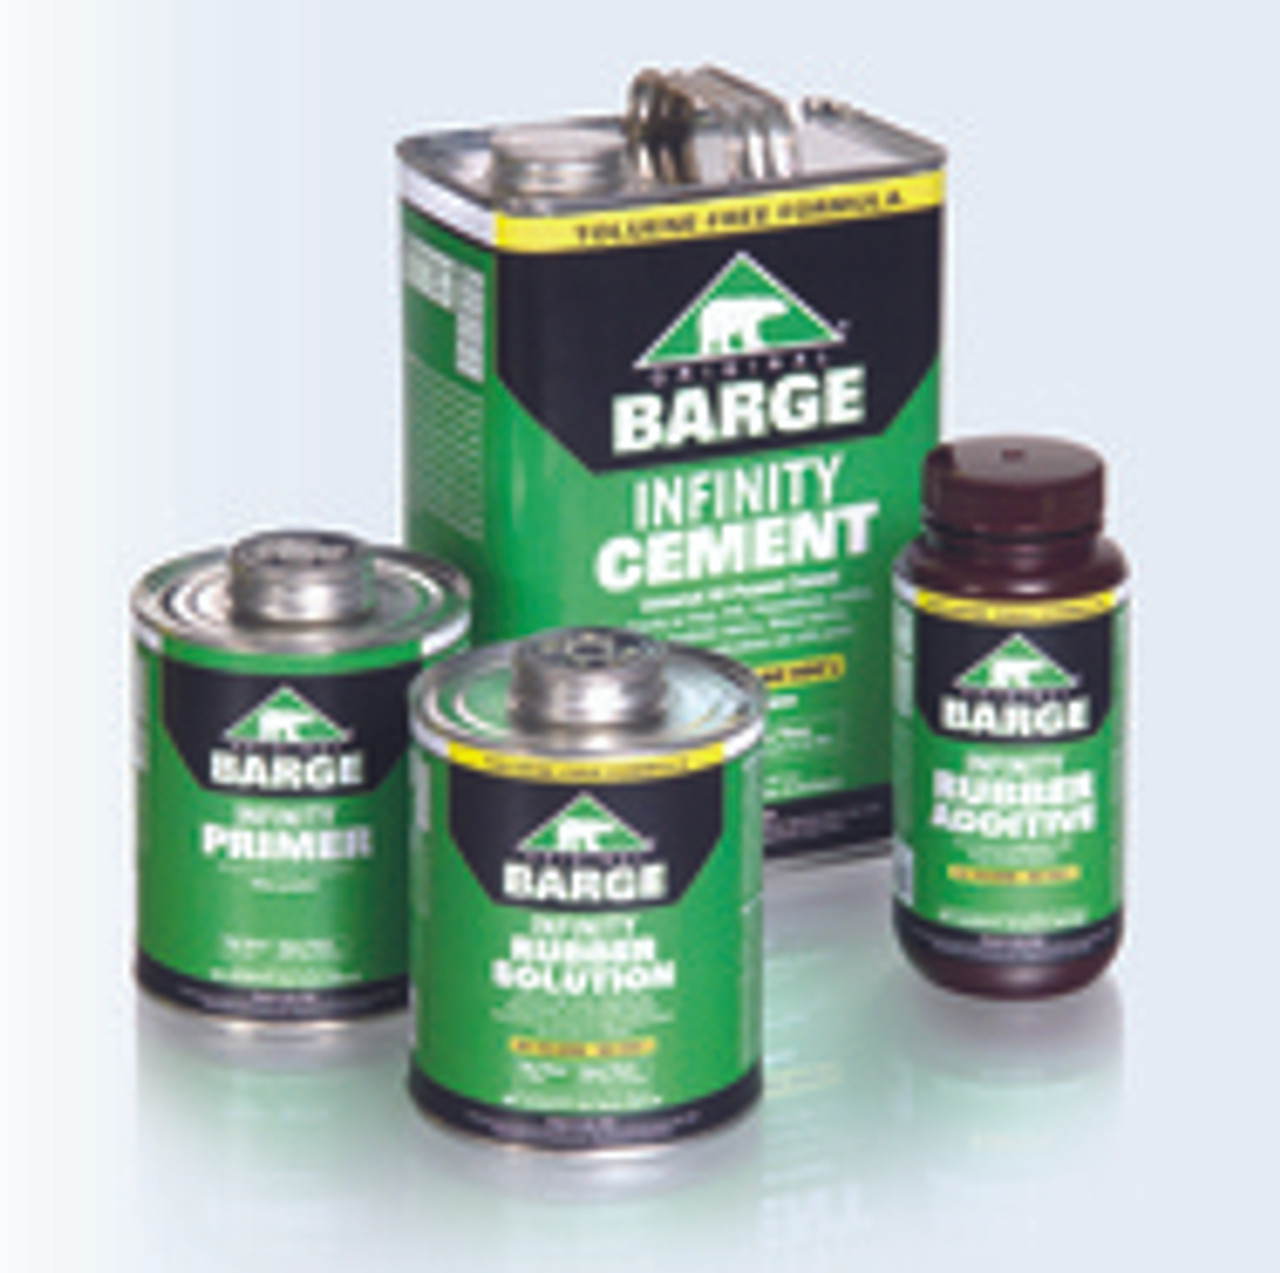 Barge Contact Cement